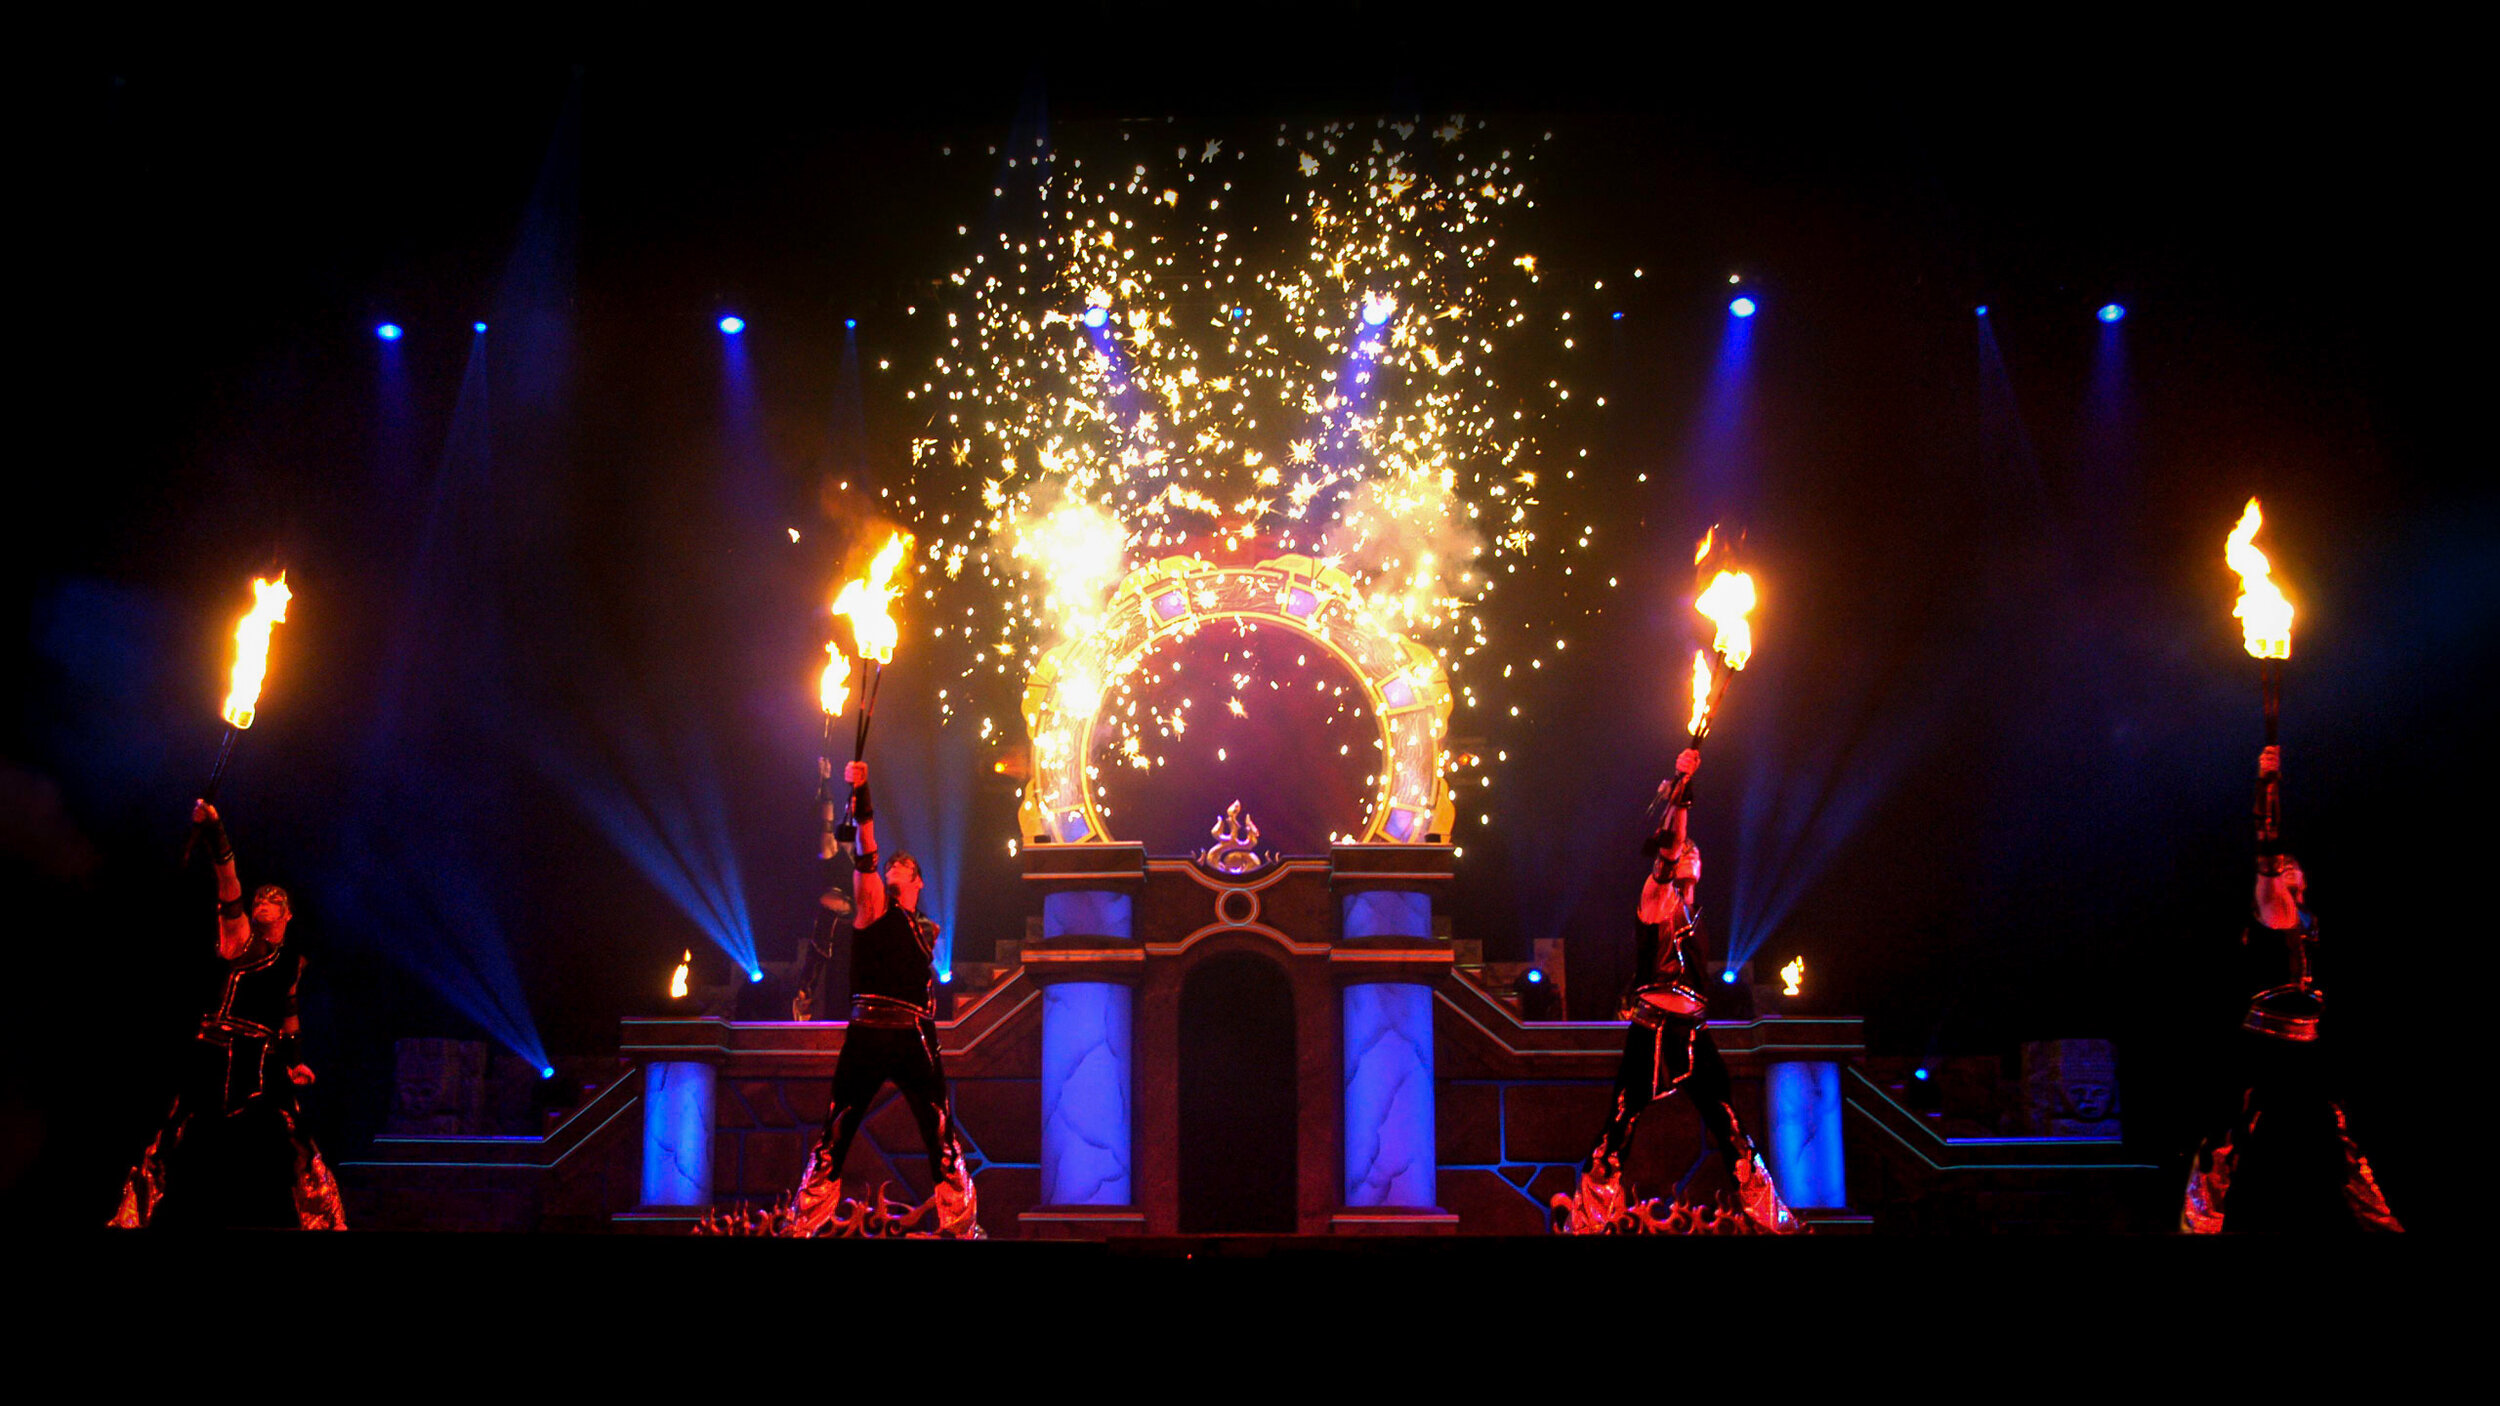 Vegas Style Fire Dancers with Masks, Finale of Fire Show with Pyrotechnic Finale, Hotel Entertainment, USA